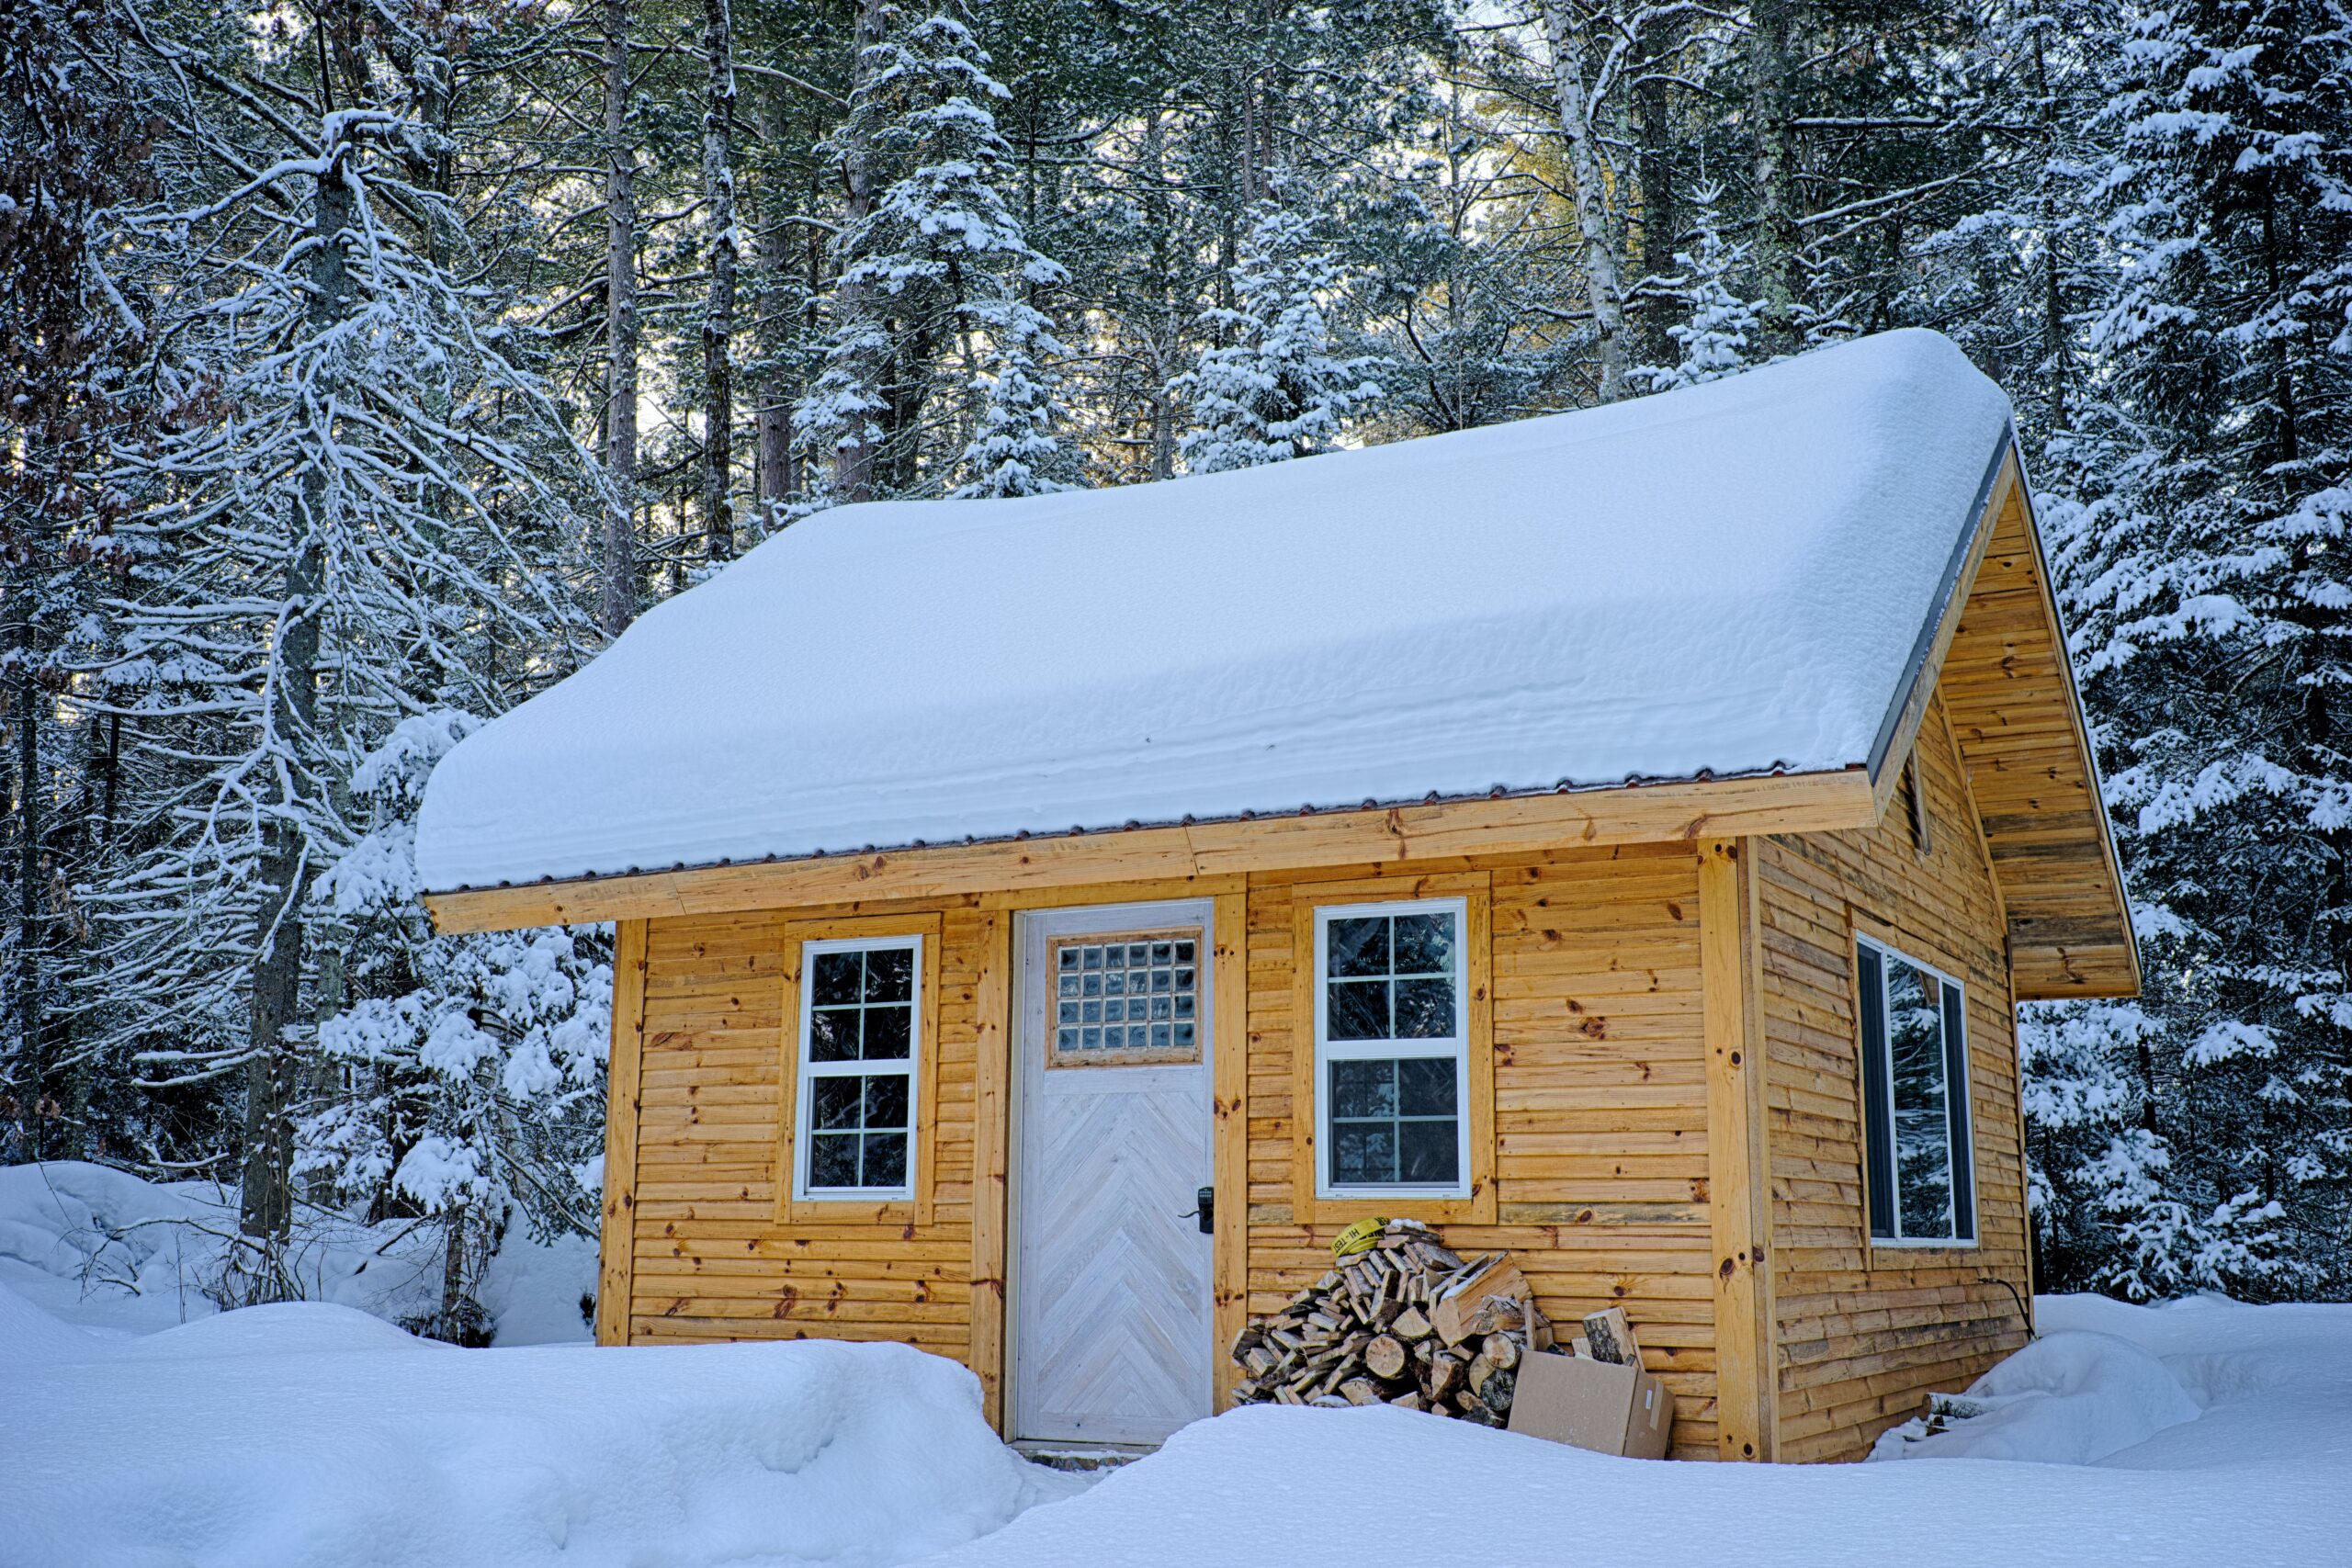 If you plan on converting a shed into a tiny home, heating and AC are some of the most important steps. Pictured: A tiny home in the snow.